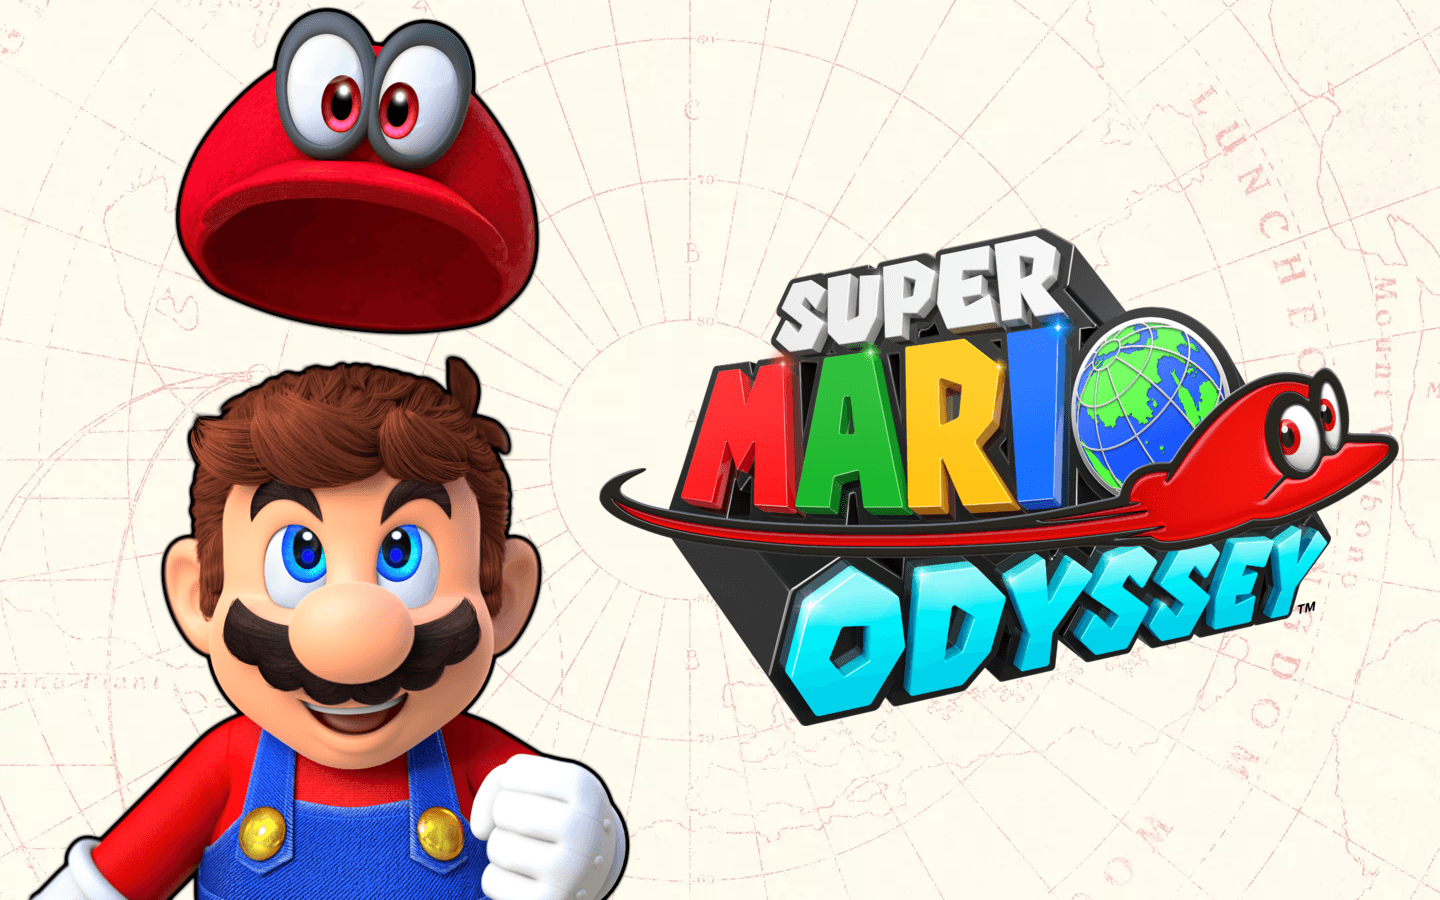 Here's another simple wallpaper! This time, it's Super Mario